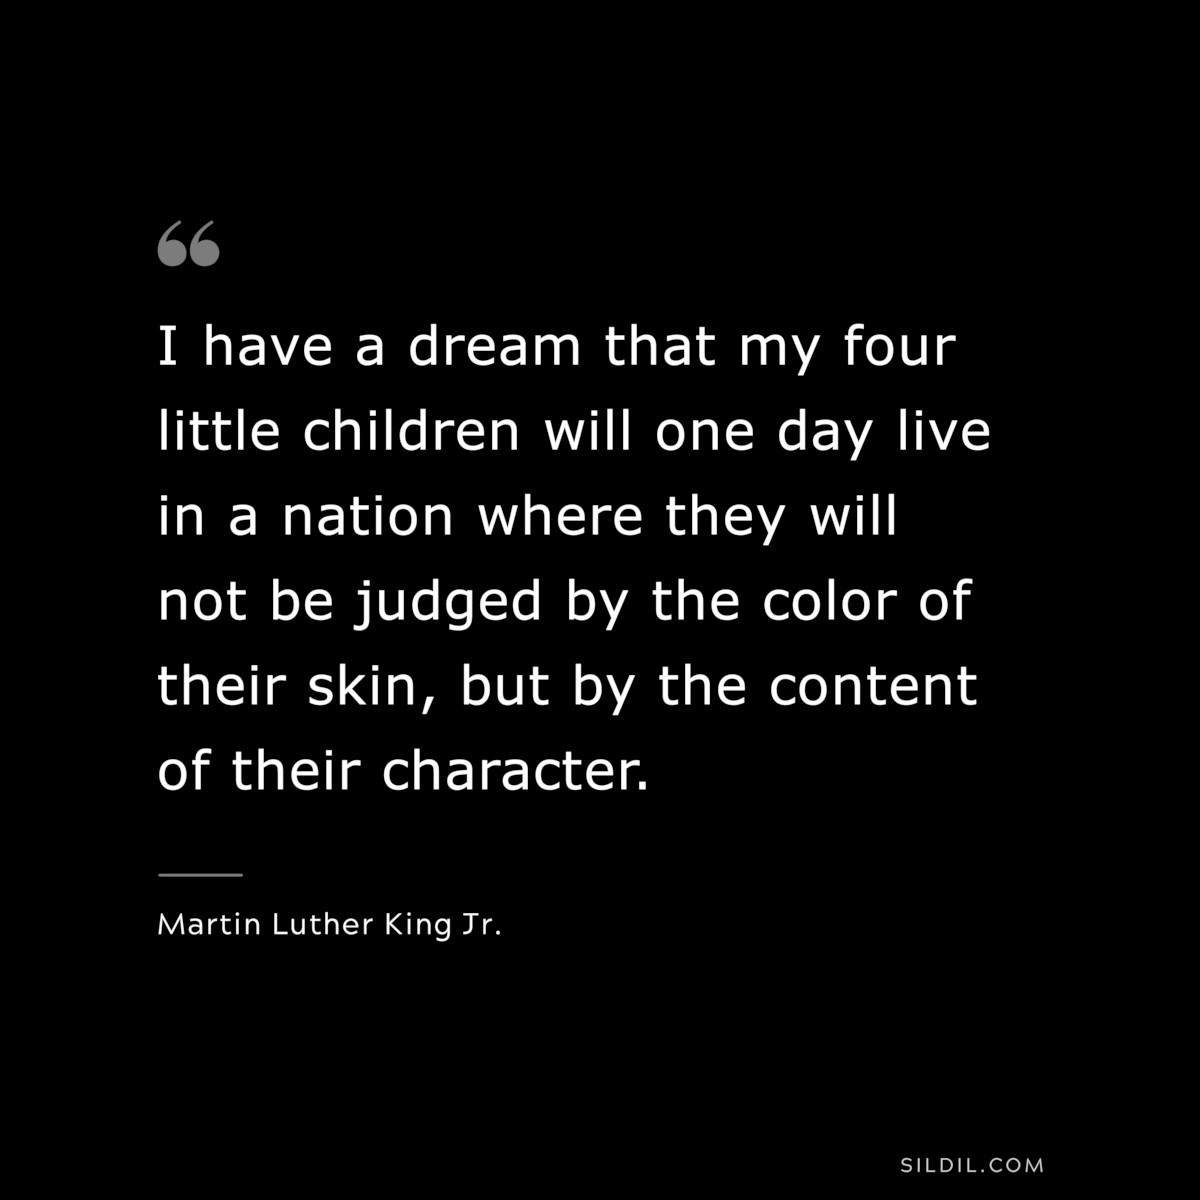 I have a dream that my four little children will one day live in a nation where they will not be judged by the color of their skin, but by the content of their character. ― Martin Luther King Jr.